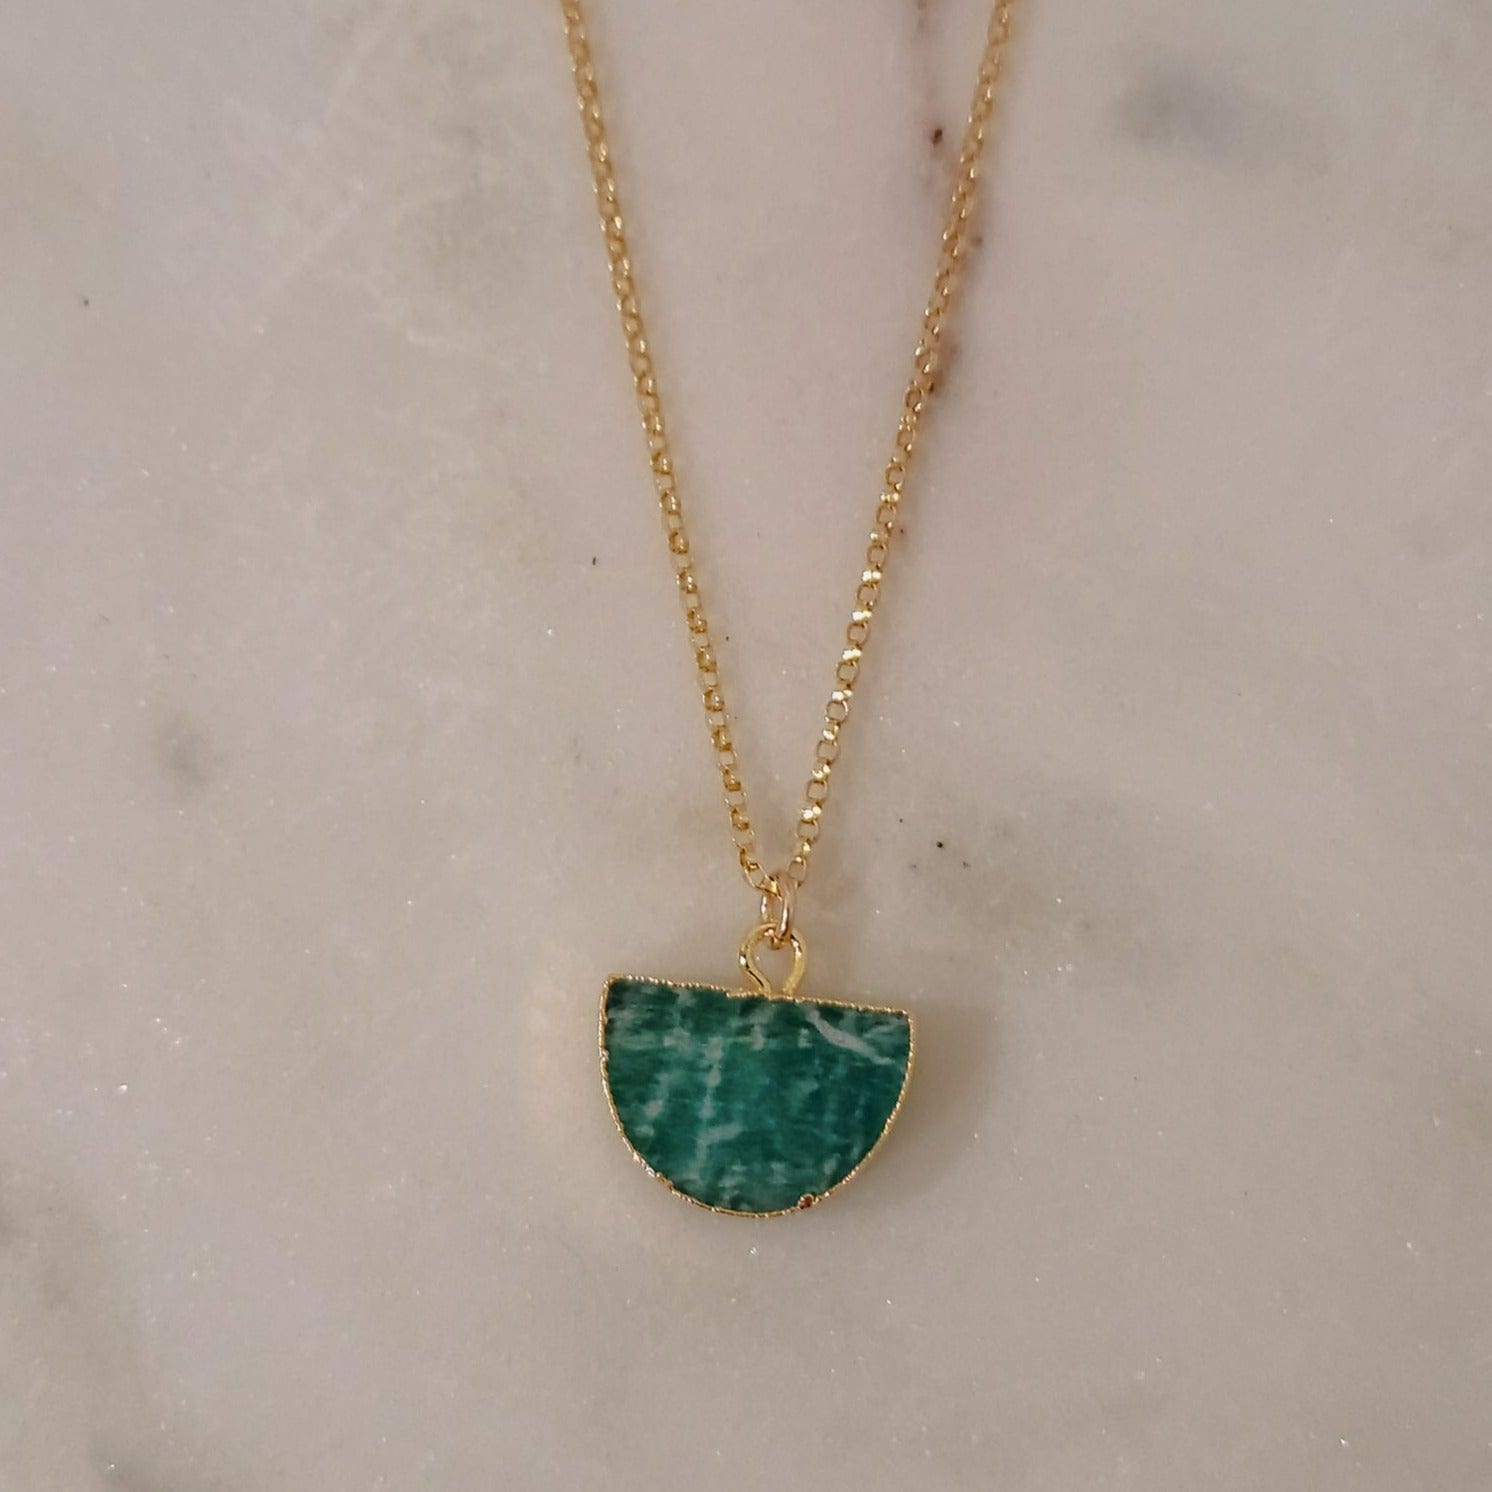 Seren and Skye gemstone necklace. Half circle amazonite, with gold electroplating hanging from a gold filled rolo chain